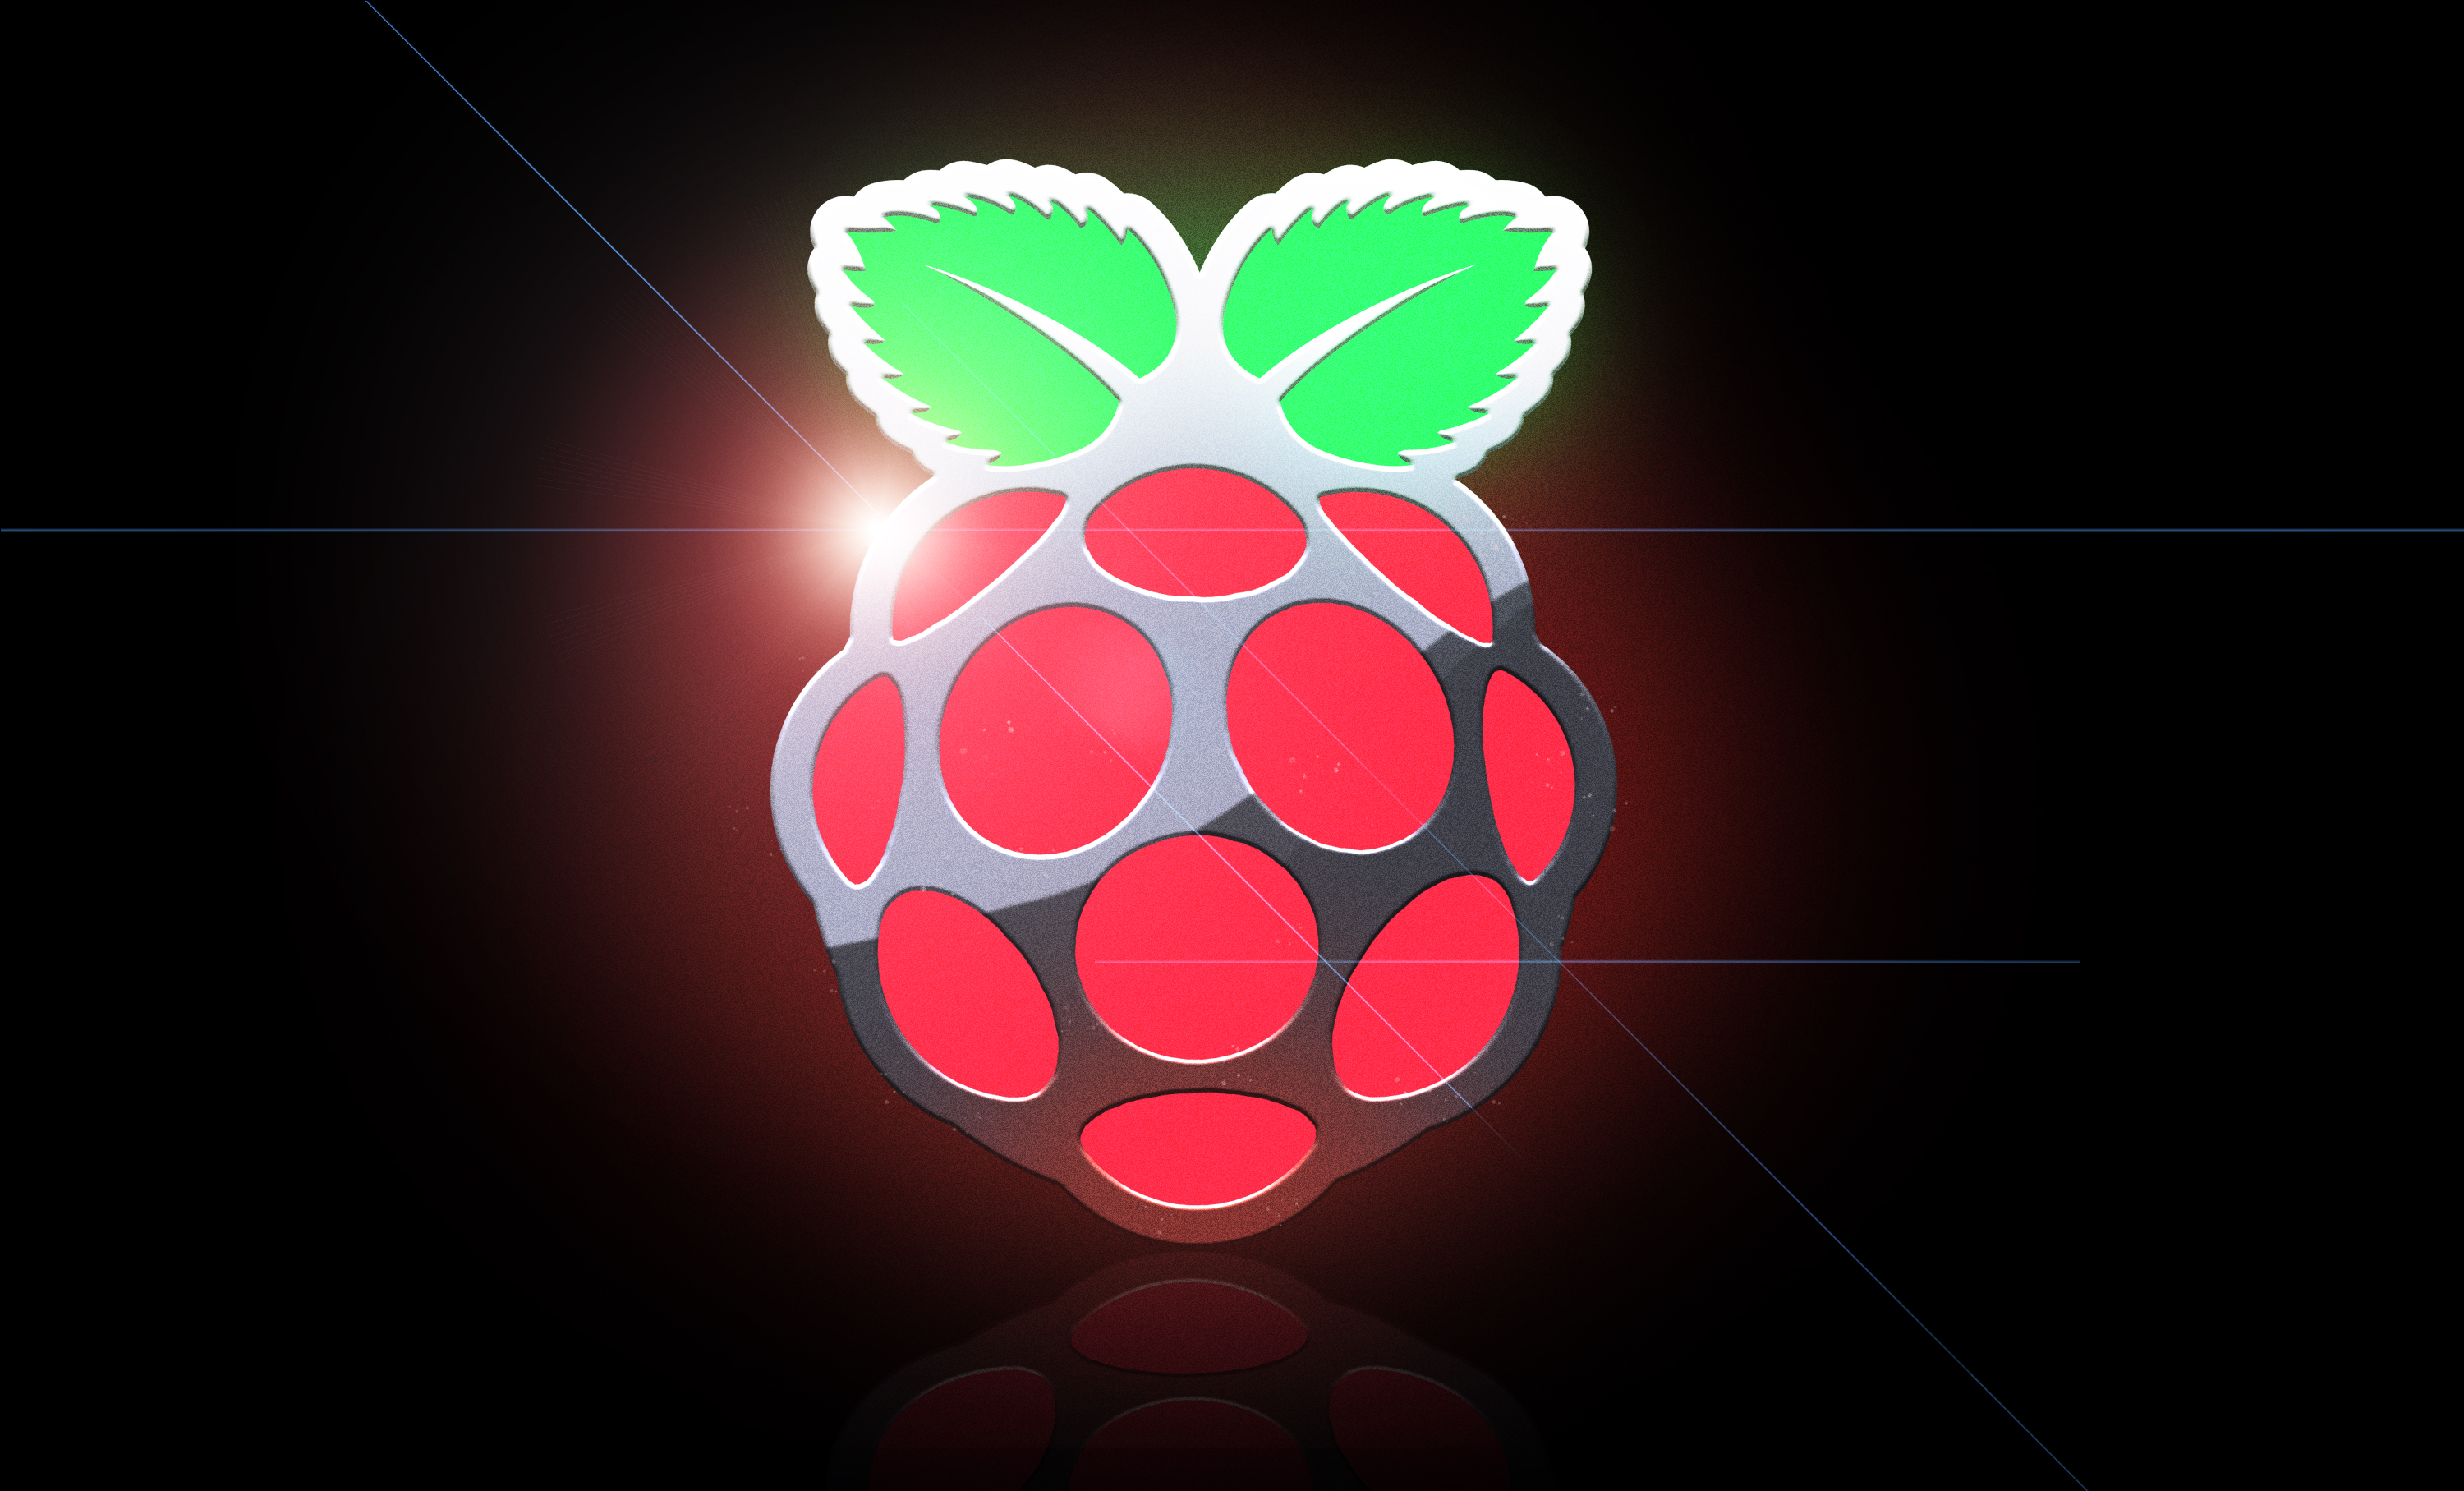 200 PC title games on the Pi 4 - Raspberry Pi Forums